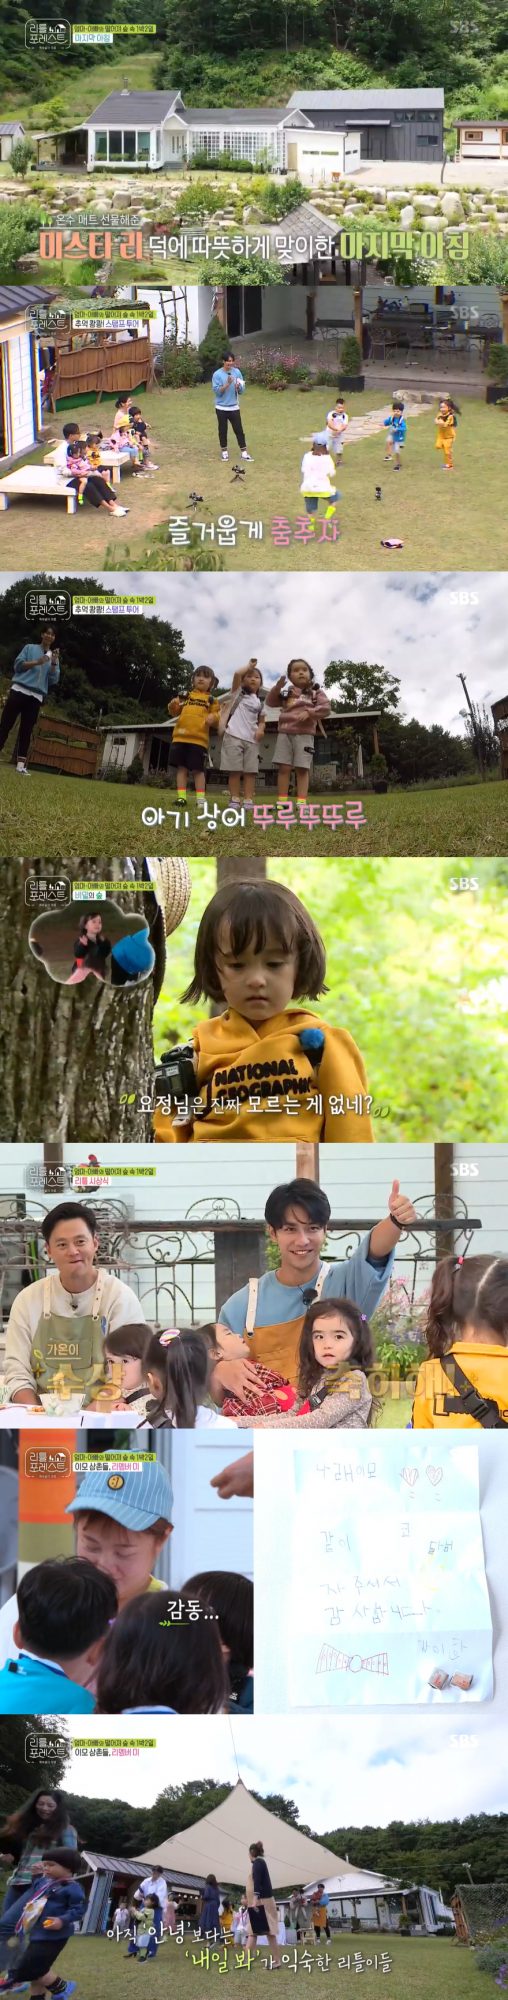 The healing and touching SBS entertainment Little Forest ended on the 7th.The audience rating, which started at 6.8%, fell to 3%, but it is highly appreciated that it showed a new attempt to be an entertainment in the 10th era of the night, a caring service in nature for children who are hard to feel nature, and uninspiring contents.On the day of the broadcast, all nine children who visited the House of Inje, Gangwon Province, gathered to commemorate the end.Members including Lee Seung-gi, Lee Seo-jin, Park Na-rae and Jung So-min planned a stamp tour for the children.It was a game where children walked around the house, such as rabbits, Forest, and stamped when they performed missions. The children started a stamp tour divided into 6-7-year-olds, 5-year-olds, and 4-year-olds.In the first mission, dancing, the 6- to 7-year-olds passed easily, but the 4-year-olds did not show any interest or interest.The children of the 5-year-old team played cute rhythm to the song Baby Shark.In the second mission, the snack plucking, the twin sisters Brooke and Grace performed the mission first, and then Eugene became alone.Brooke and Grace, who realized that Eugene was sad, gave Eugene a heart.Following the third balloon tailing mission, the fourth mission was the Secret Forest.Park Na-rae hid and told the kids through a microphone to introduce himself as a fairy and tell them the secret.While talking, Brooke said, I want to say something, and I love you, Missari The Uncle.The members prepared lunch, including Jajangmyeon, Menbosha, and pineapple fried rice, for their last meal, while the other children ate delicious, but Brookman was sulky.After the meal, the members prepared a photo shoot-and-goal awards and gave a prize to each of the children.After the awards ceremony, Lee Han was impressed by the letters and caramels written directly to the members.The parents of the children came and the children left one by one.Lee called Park Na-rae, who was packing his baggage, to sing the OST of the animated film Coco, Remember Me, and asked for the regret of farewell.Brooke told Jung So-min, When Im an adult, Ill be Little Forests aunt. The impressed Jung So-min couldnt stop crying easily.Brooke, who had said goodbye to the animals, ran to Lee Seo-jin before getting into the car and Lee Seo-jin and Brooke met each other and quickly blushed.Brooke blinked her big eyes to keep her eyes shut.Lee Seo-jin said in an interview, I have never actually been tearful in broadcasting, but then Brooke felt like it (crying) and wanted to be a big deal.I thought I could cry if she cried here. I held back, pledging not to look like this.Graces mother told Lee Seung-gi that Pororo has a character named Eddie who makes and invents anything well, and Grace says that the Uncle is like Eddie.Lee Seung-gi has been making footrests, tree House, swings, etc. for children. Lee Seung-gi was proud to say, Thank you for knowing.Jung So-min also wrote a handwritten letter to each of the children.If the letter was kept (until it was) it would have been like this, I thought it would have been more memorable if there was such a time, Jung So-min said in an interview.The members all said they wanted the children to have a pleasant and happy time here.Little Forest was the first entertainment program organized by SBS in the 10th era when the drama was aired on Monday, an attempt to reflect the viewing patterns that changed according to changes in the broadcasting environment.It was new and bold, but if it is based on ratings, objective performance is unfortunate.There was no provocative composition and intervention from the production team in Little Forest, which was different from the way other parenting entertainments talked about specific concepts, episodes, and topics each time.Little Forest was the most important focus on helping children in House play freely in nature.Lee Seung-gi, Lee Seo-jin, Park Na-rae and Jung So-min were cared for so that children could play safely and happily.The four of them were faithful to their respective roles.Lee Seung-gi made the items or rides he needed for his children and Lee Seo-jin took care of each meal considering the childrens taste and health.Park Na-rae played friendly at the eye level of children as he helped Lee Seo-jin cook.Jung So-min, who is usually interested in children and is good at caring for them, grasped the minds of children who other members did not notice at once and cared carefully for the children.The members informed the children who grew up only in the city how to play in the soil, let them observe chick hatching, play in the forest as a playground, reduce the resistance to nature and learn the pleasure of playing in nature.But they didnt notice the childs condition, or they didnt take care of the child who was trying to defecate, and they were getting used to the poor care they had.The children were able to grow up because of the childrens innocence, infinite imagination, and warm hearts that impressed the members as well as the viewers.As the members approached the children, the children also opened their hearts to the members, and the children and members were crying, laughing and building up their affection.It was a clear energy that I could not easily feel in entertainment these days.